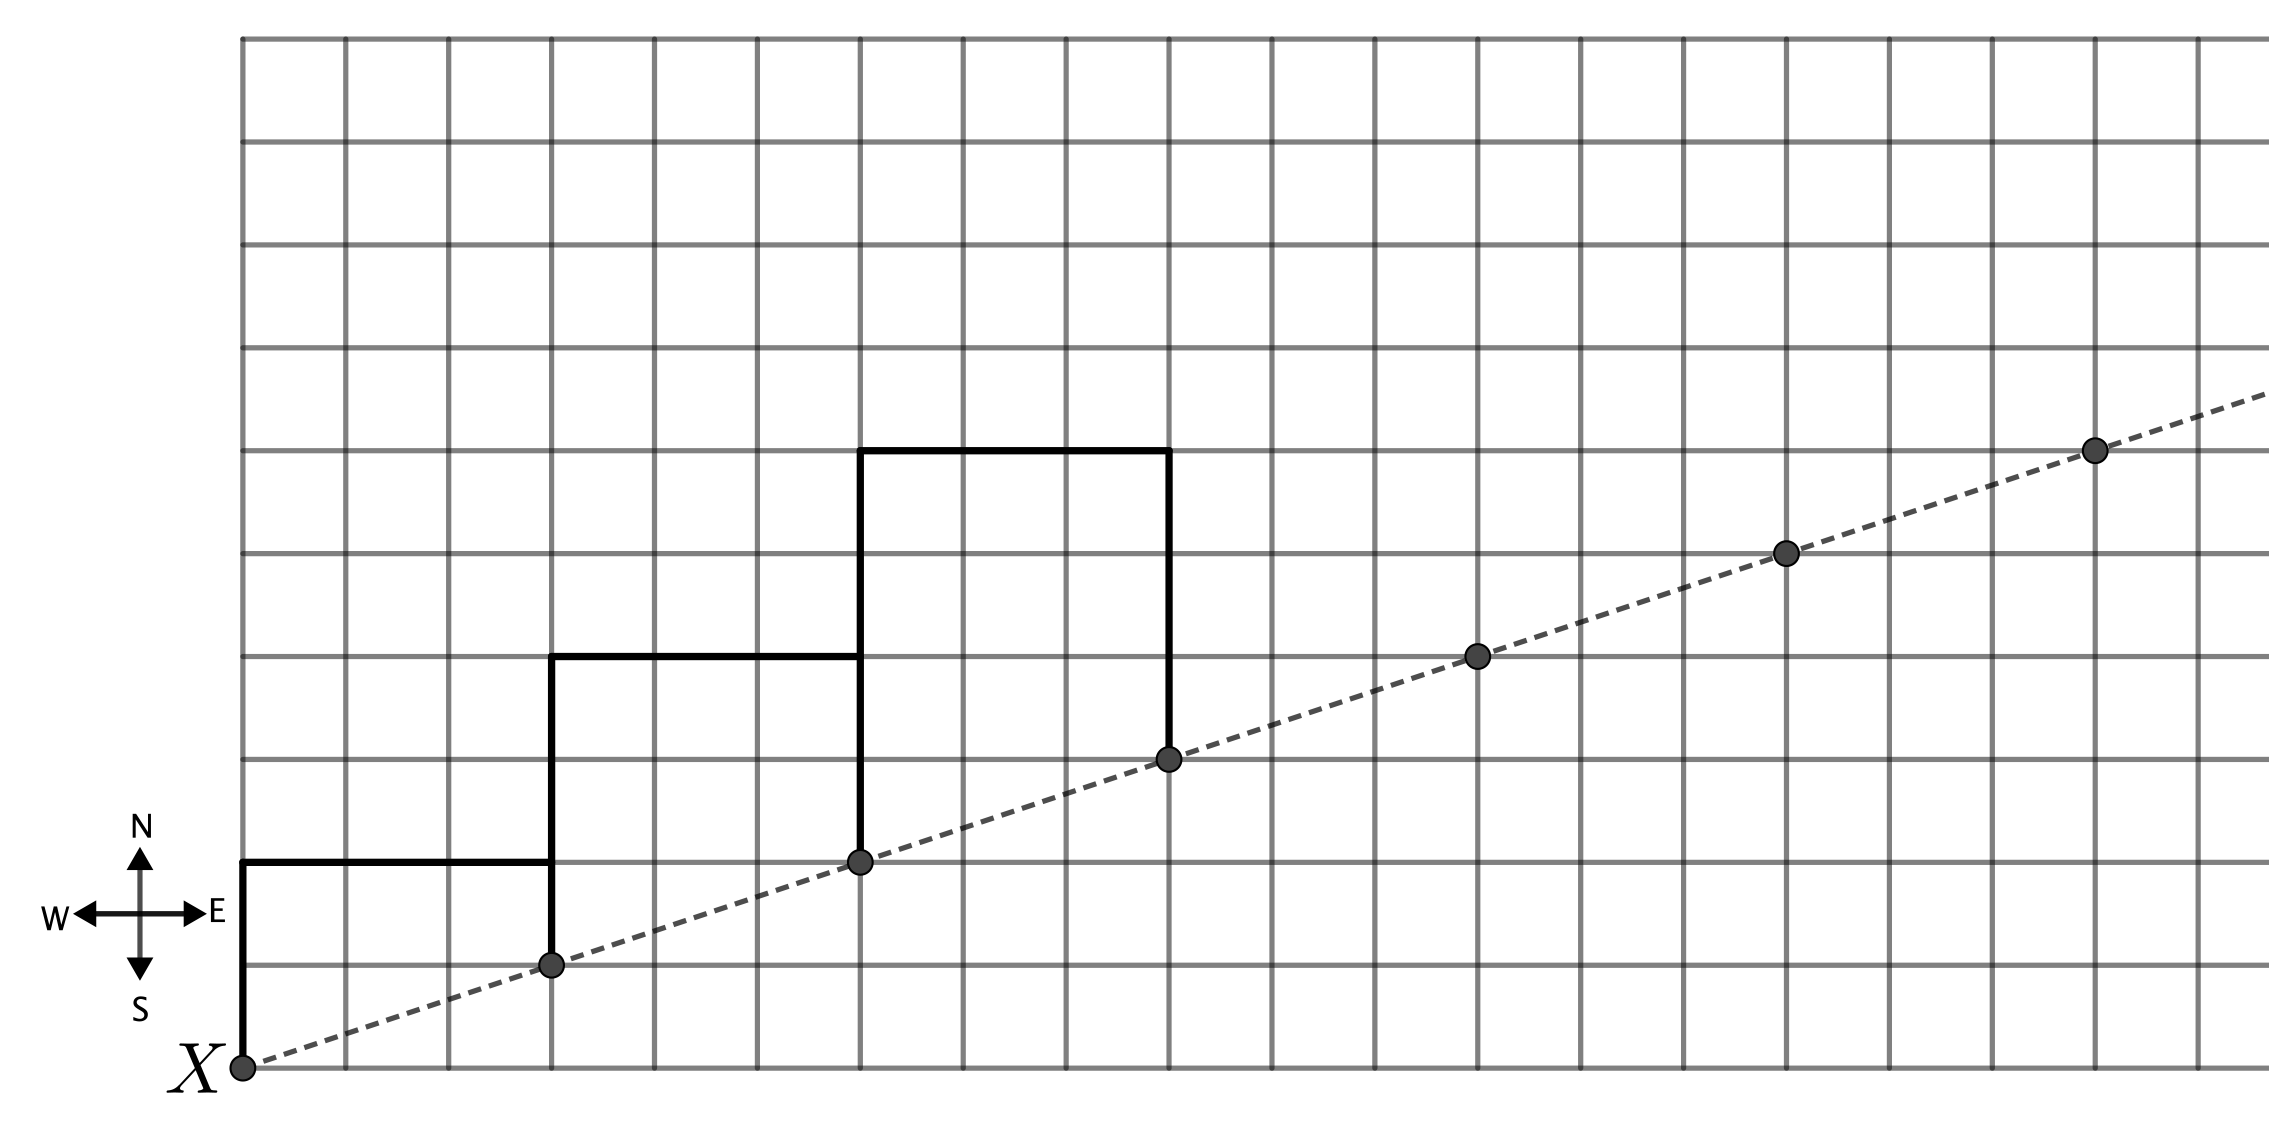 A line passing through X and the six other points.